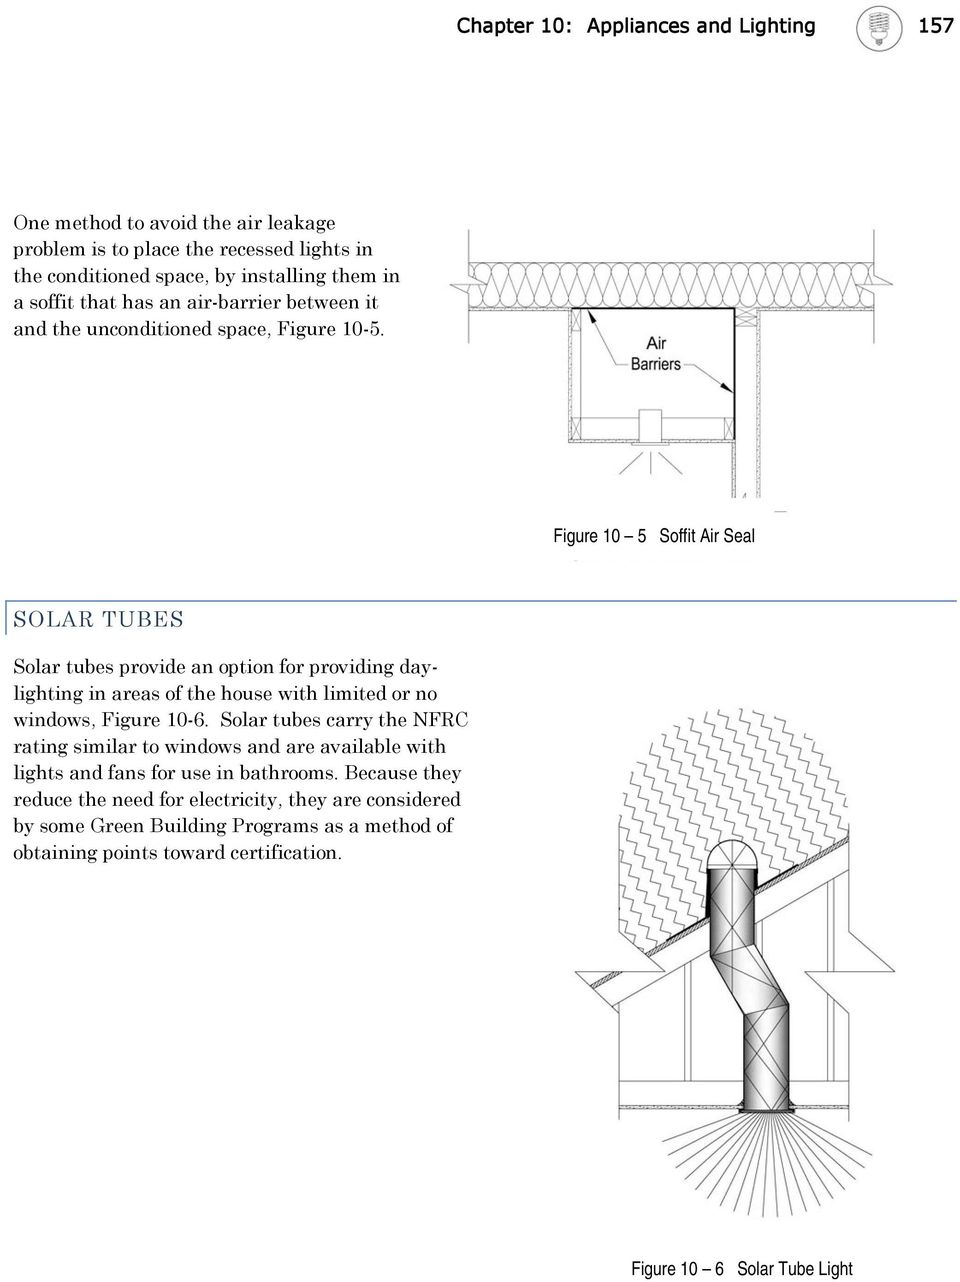 Figure 10 5 Soffit Air Seal SOLAR TUBES Solar tubes provide an option for providing daylighting in areas of the house with limited or no windows, Figure 10-6.